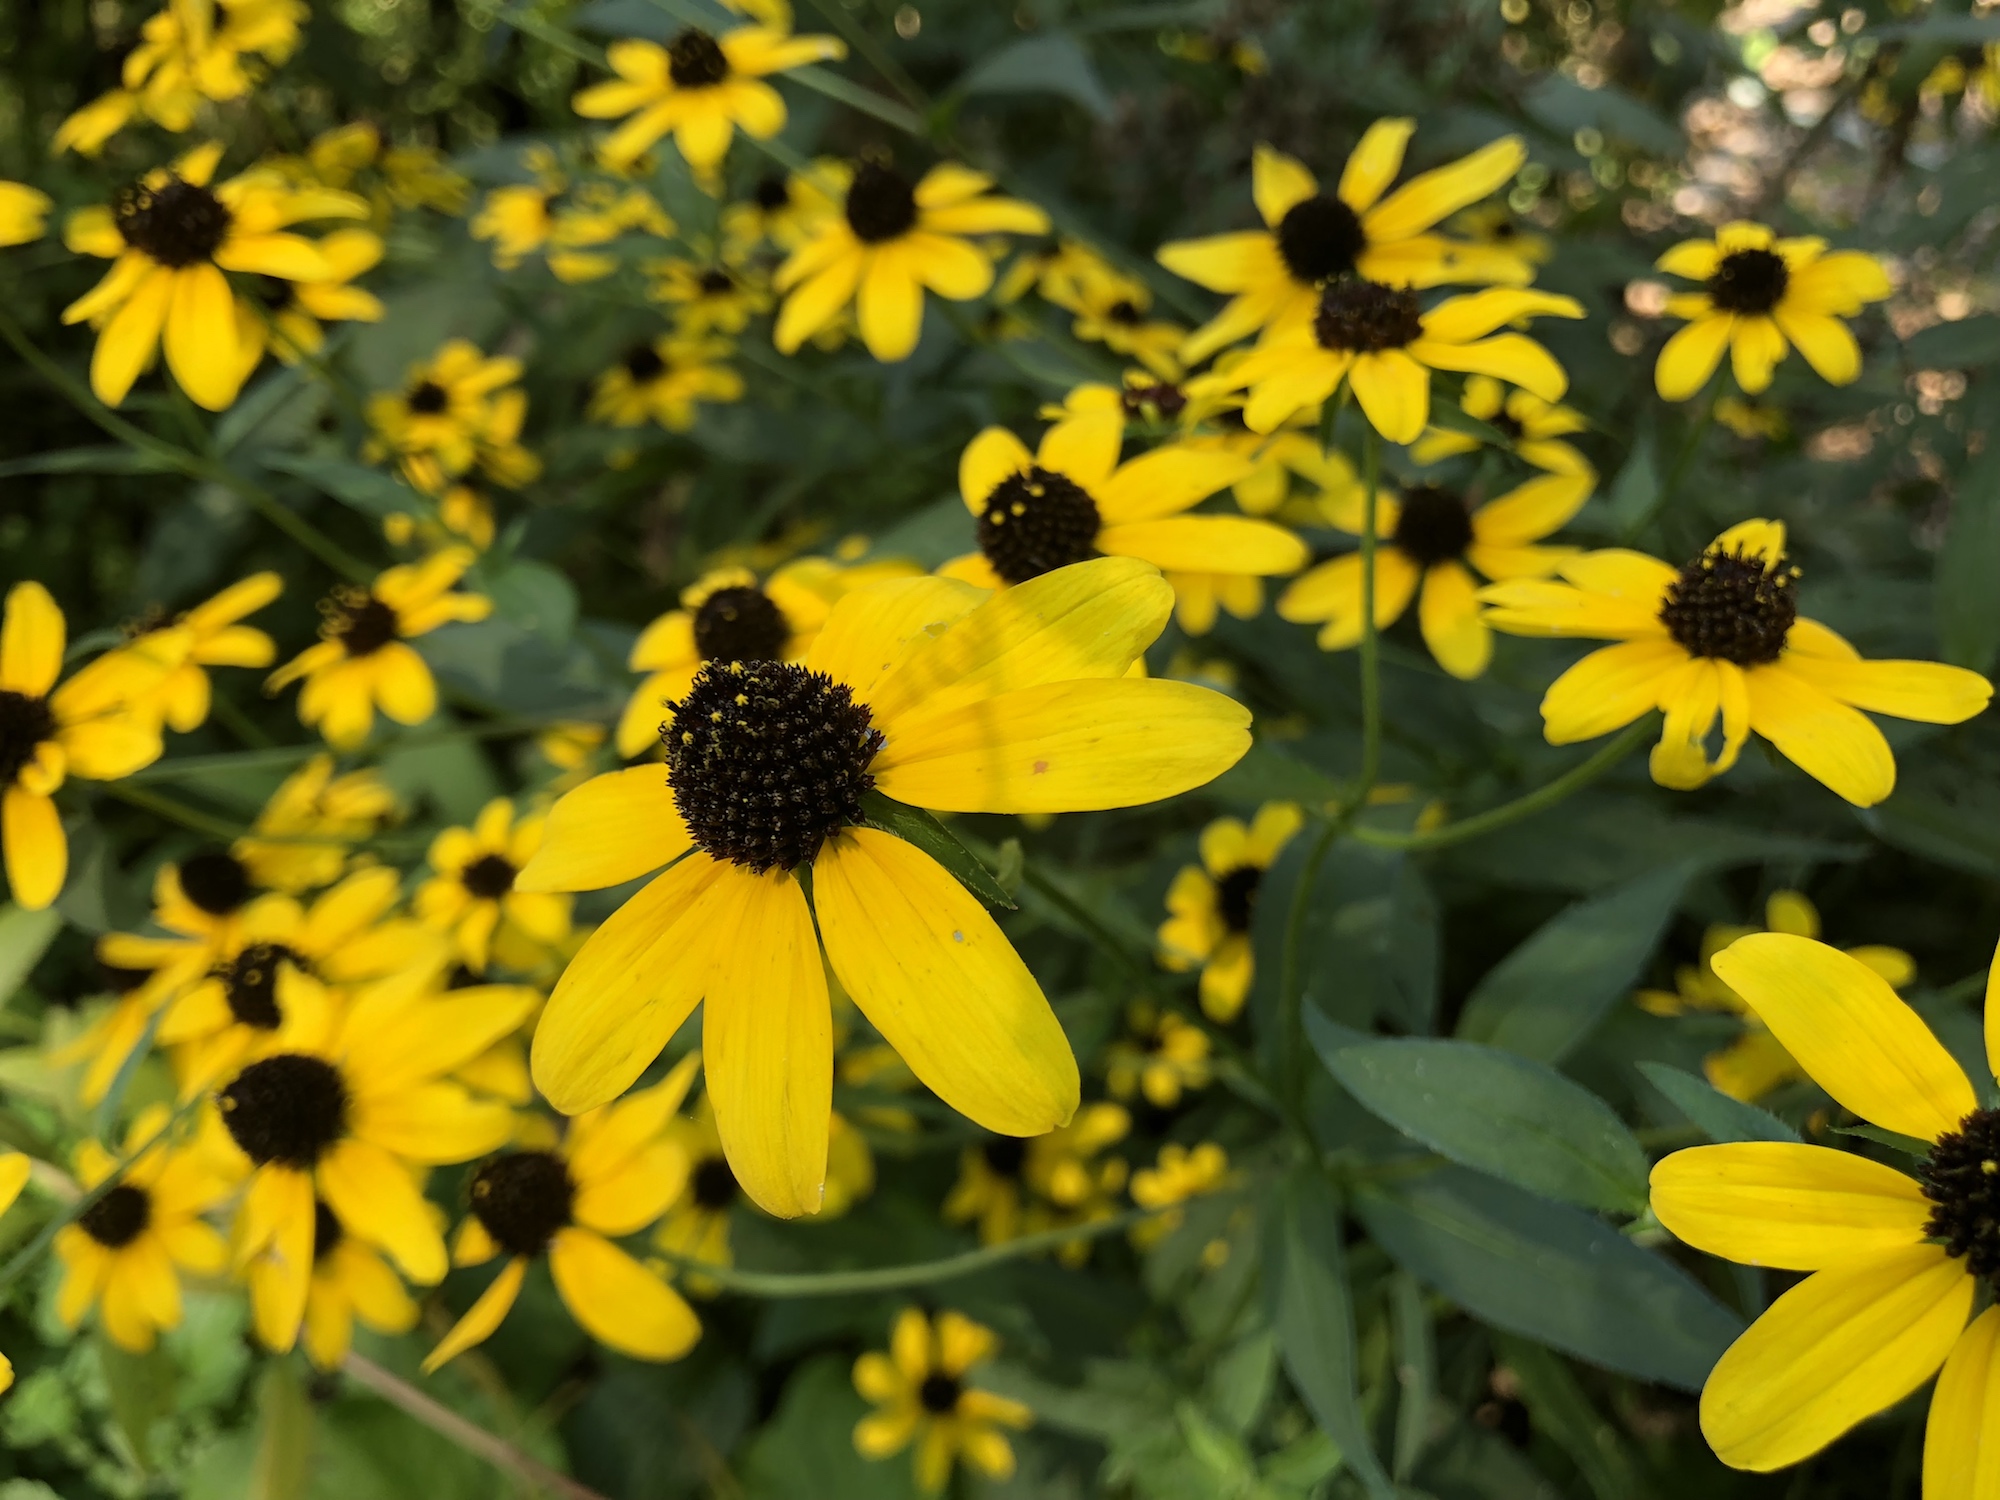 Brown-eyed Susan on bike path near Commonwealth Avenue in Madison, Wisconsin on September 12, 2018.